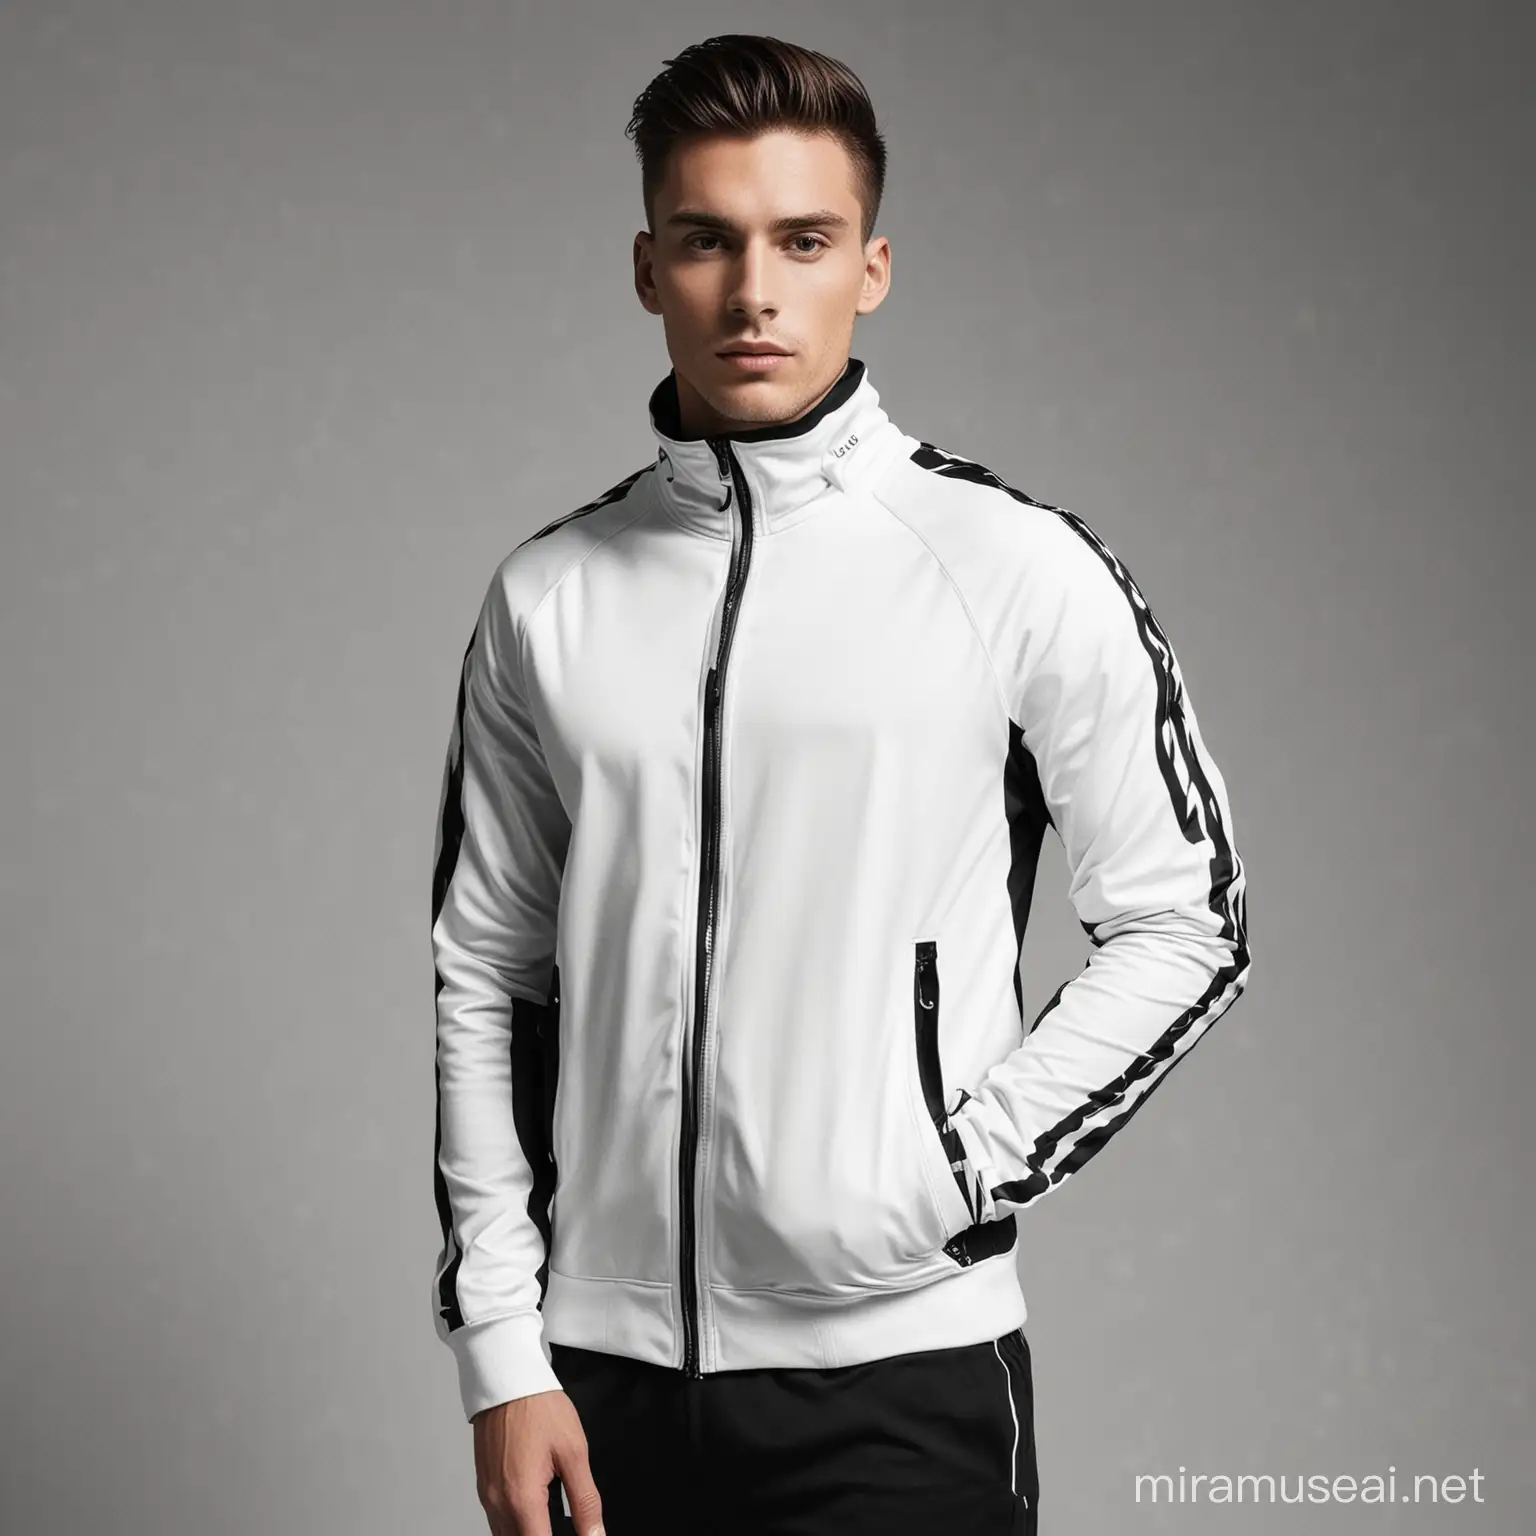 create turtle neck sports jacket in black  and white colors. male model

